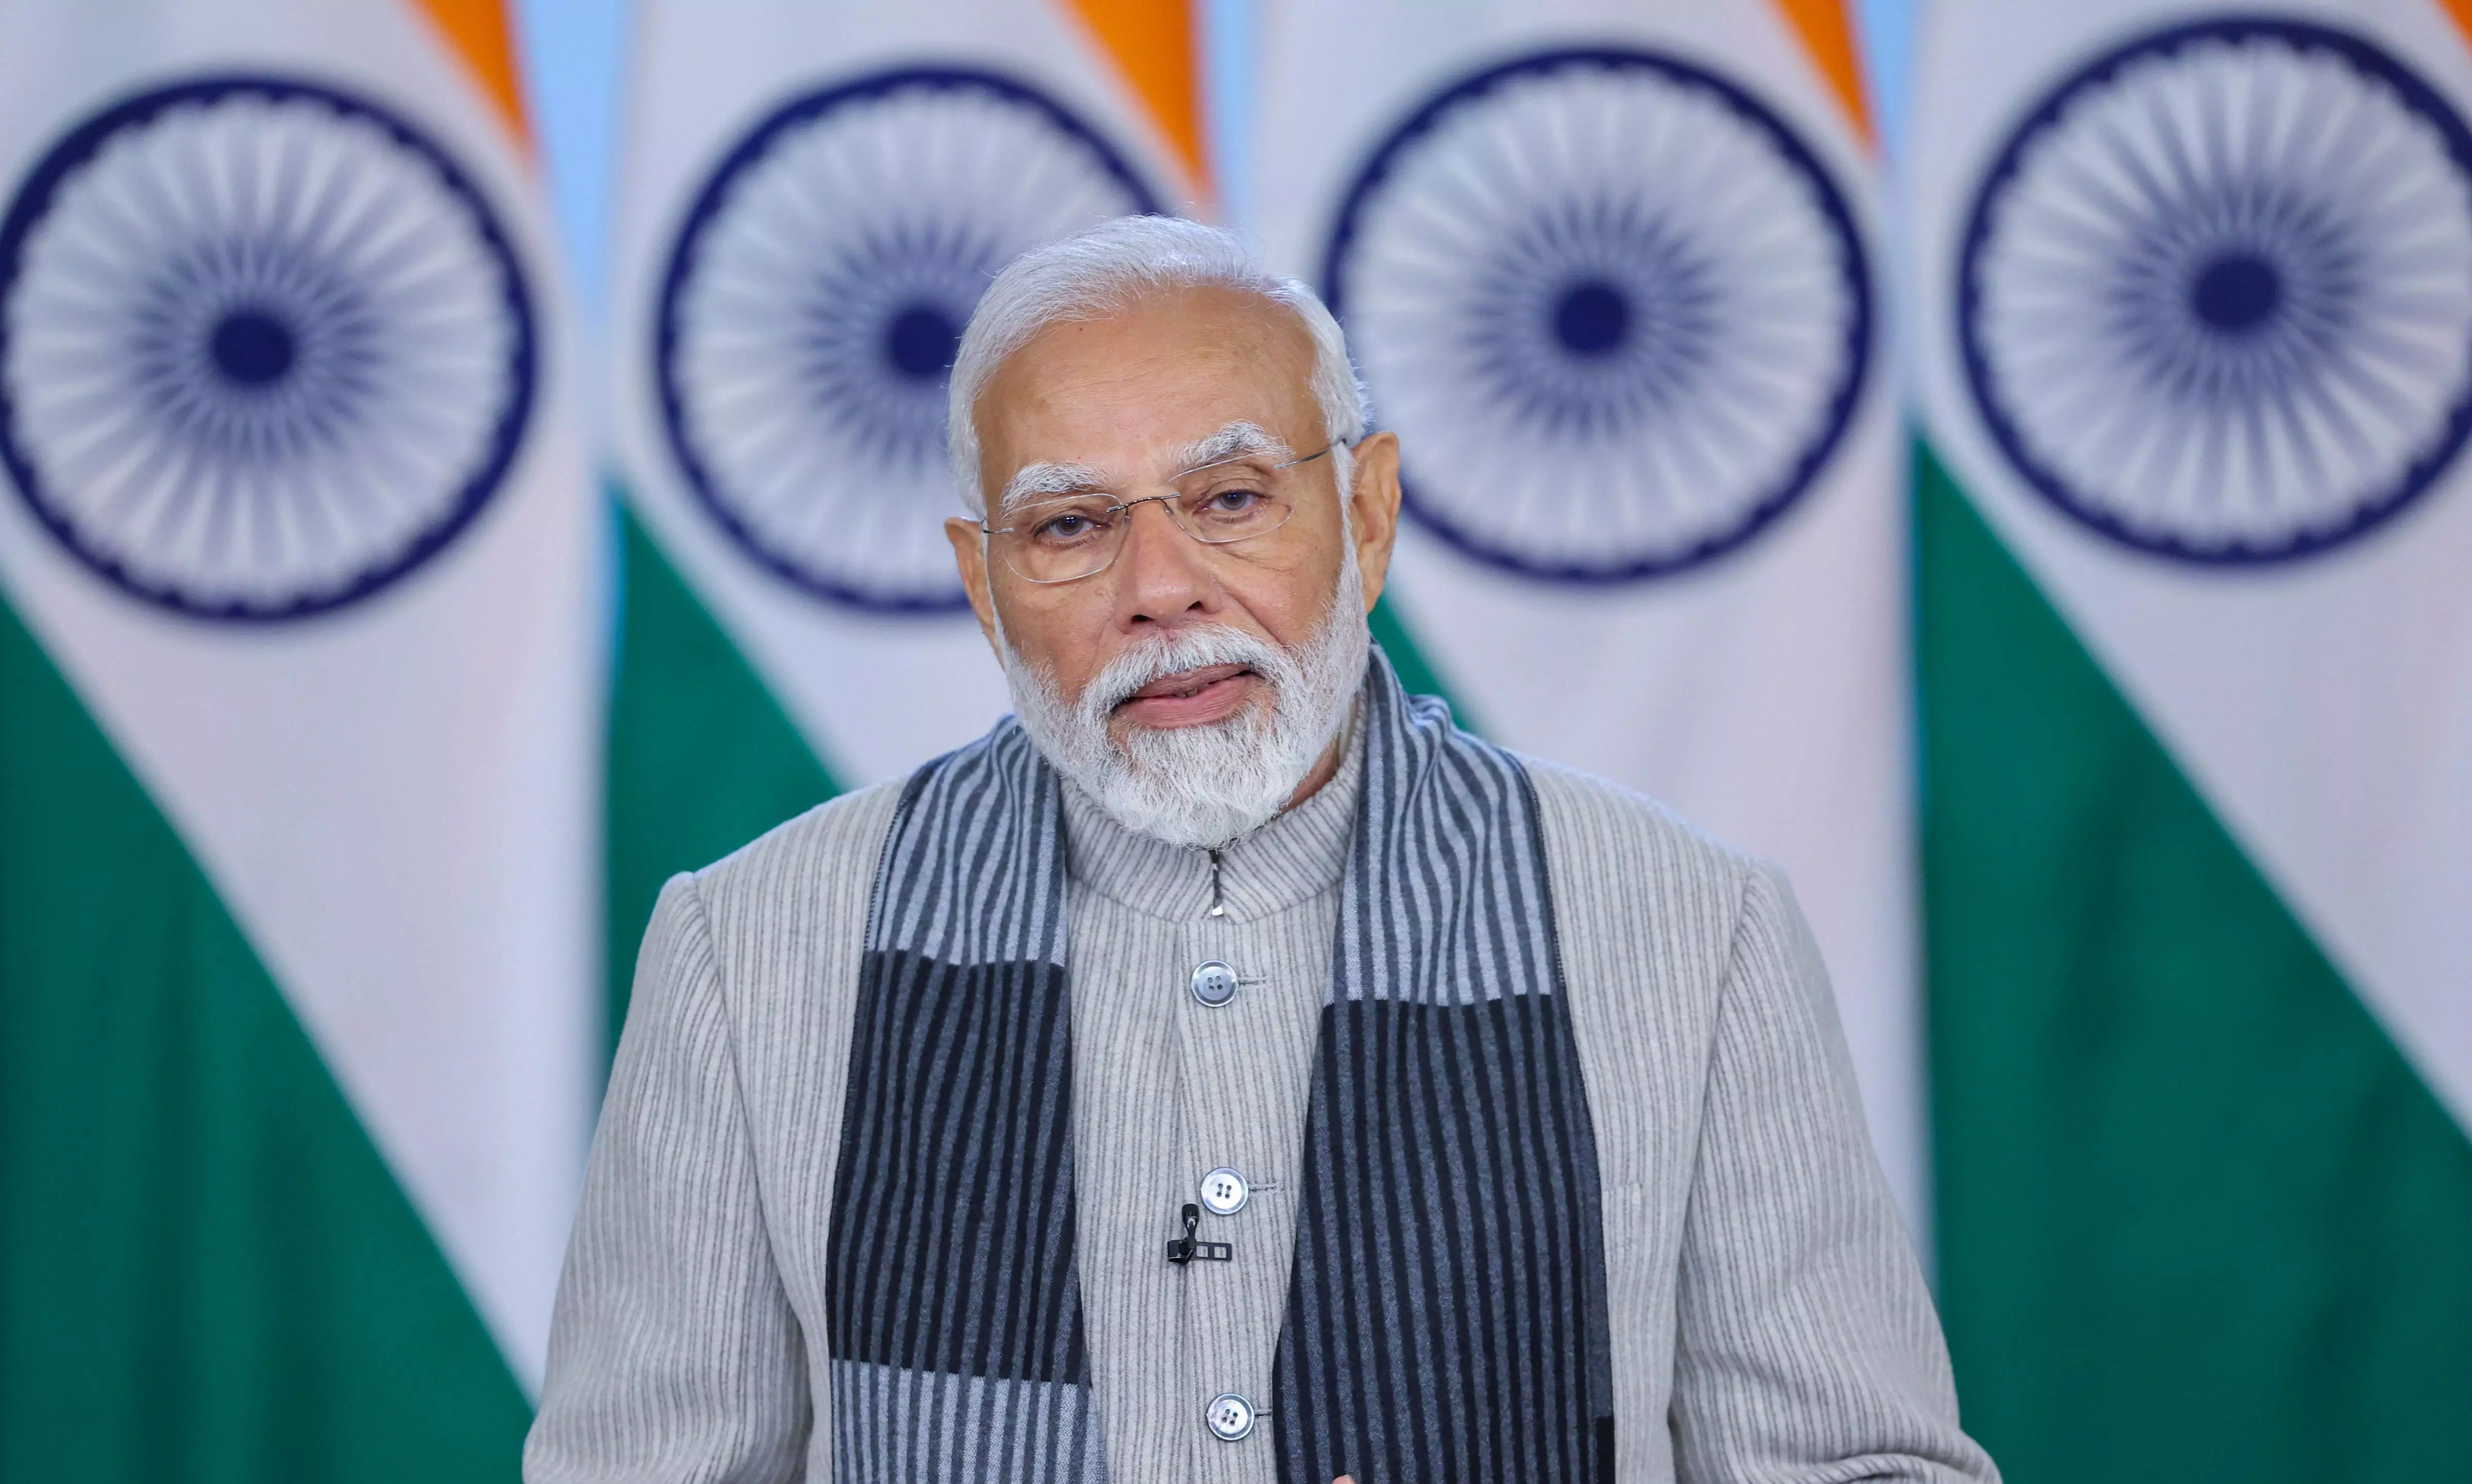 Modi to unveil projects worth Rs 11,600 crore in Assam